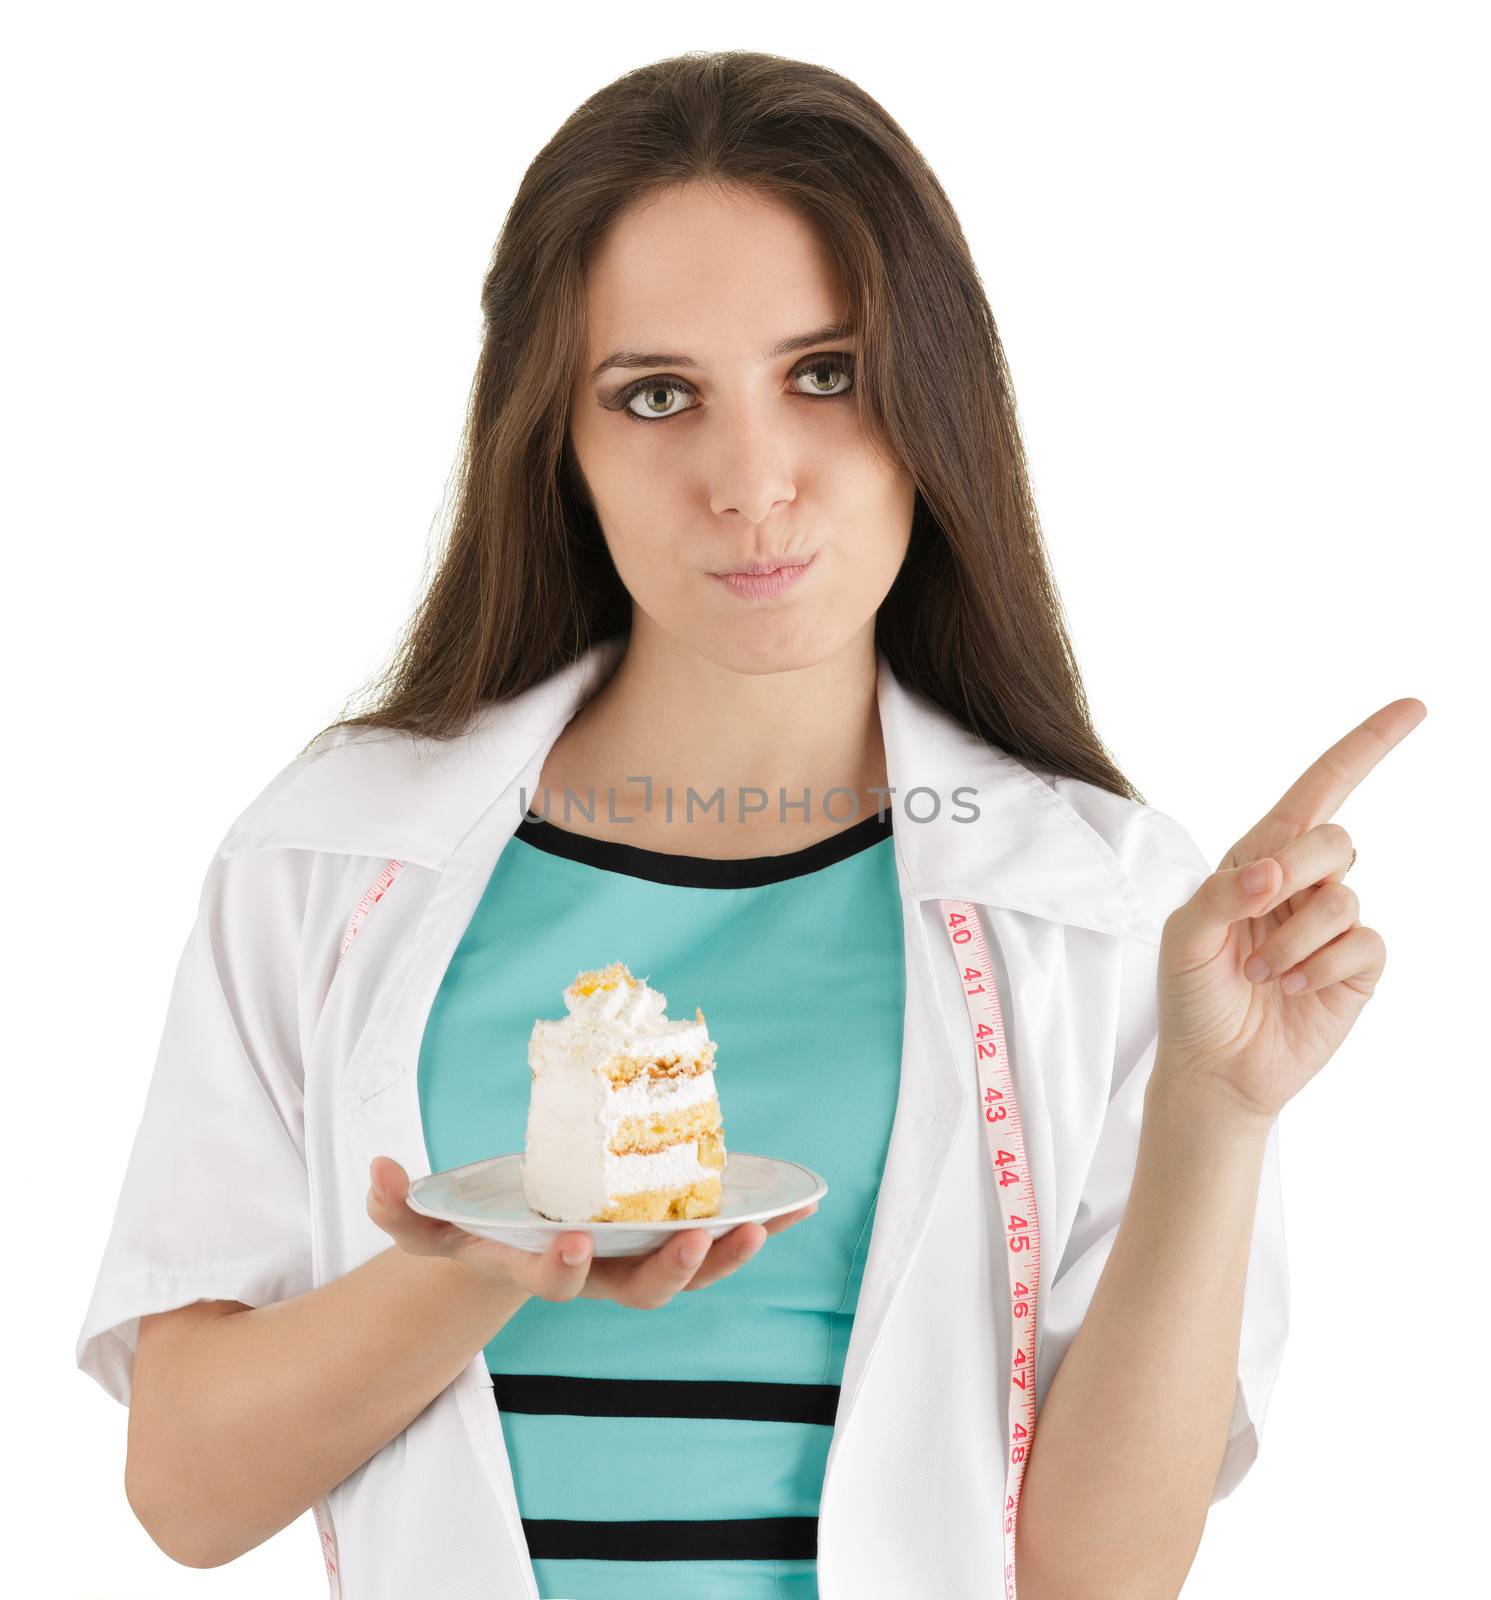 Woman nutritionist saying “no” to cake, isolated on white background.